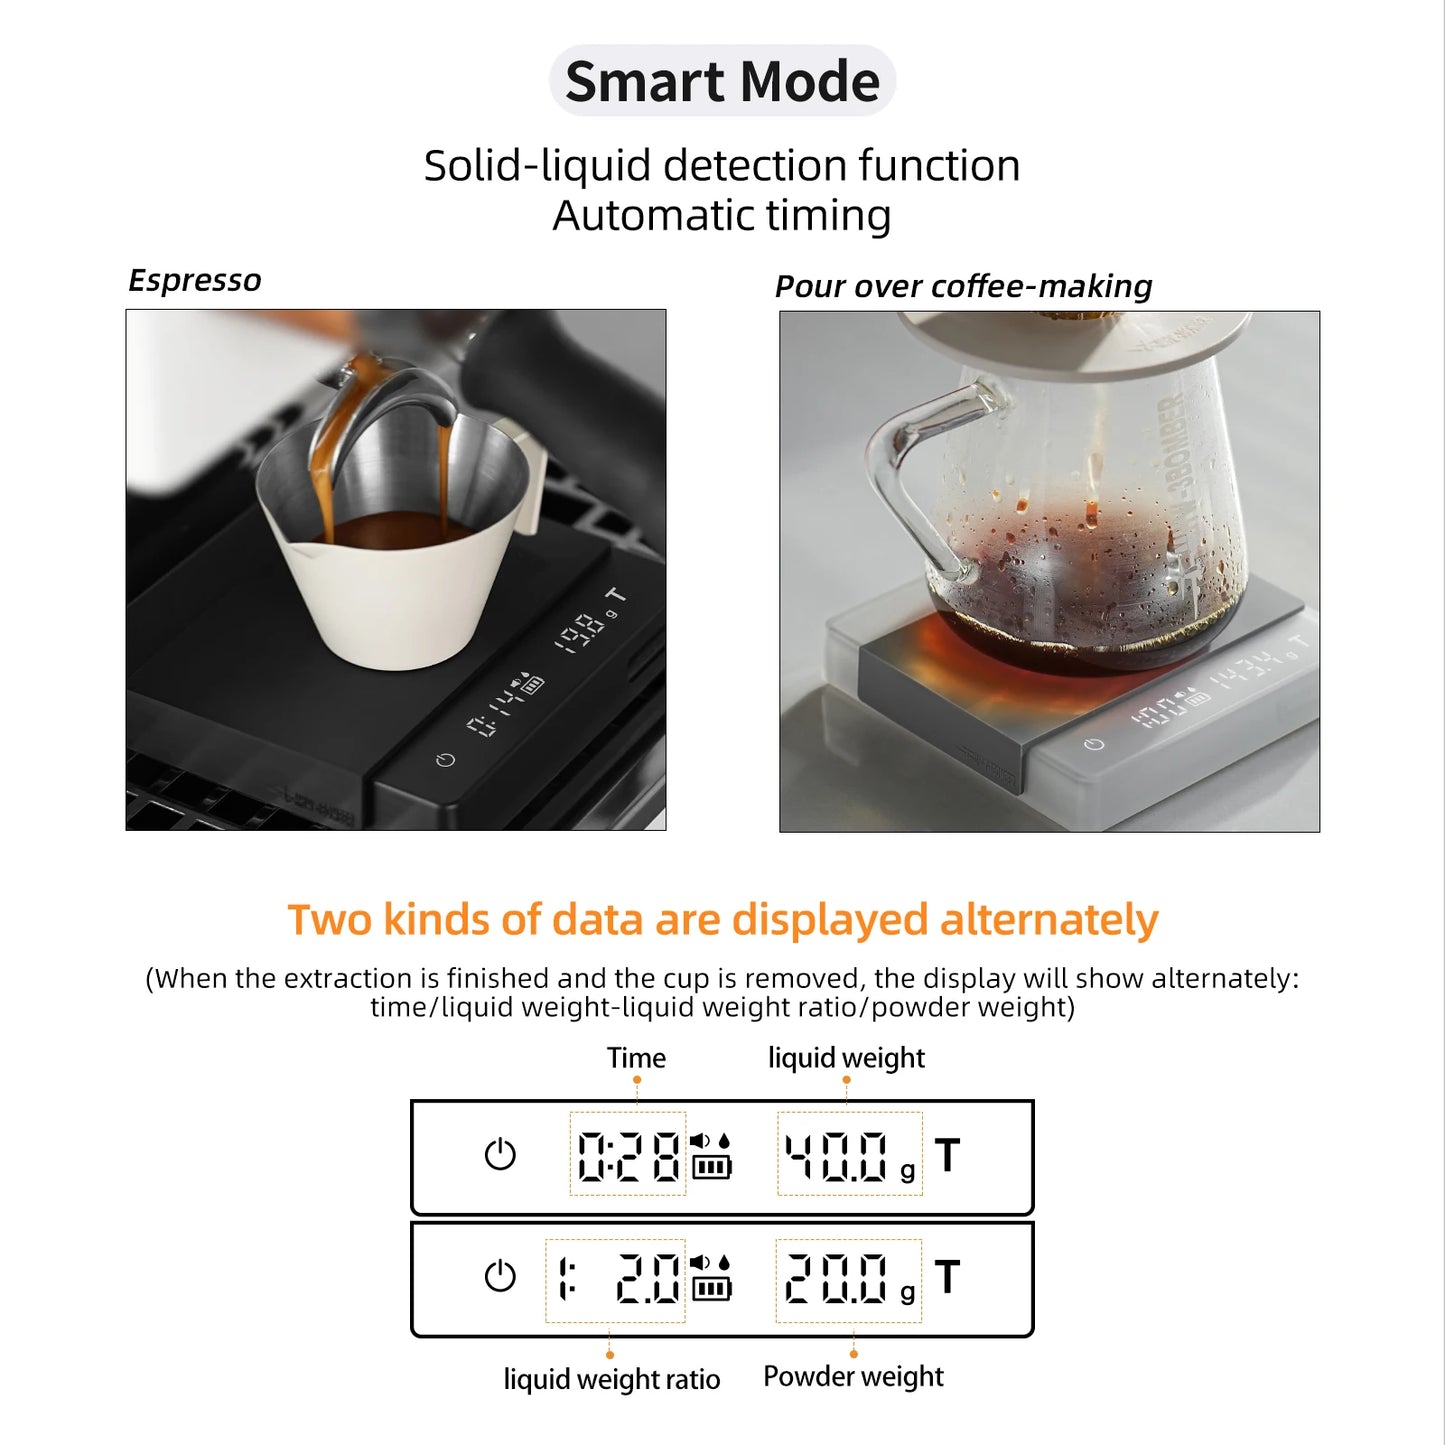 MHW-3BOMBER Digital Kitchen Coffee Scale 2000g/0.1g High Precision Cyclic Rechargeable Electronic Scale Home Barista Accessories